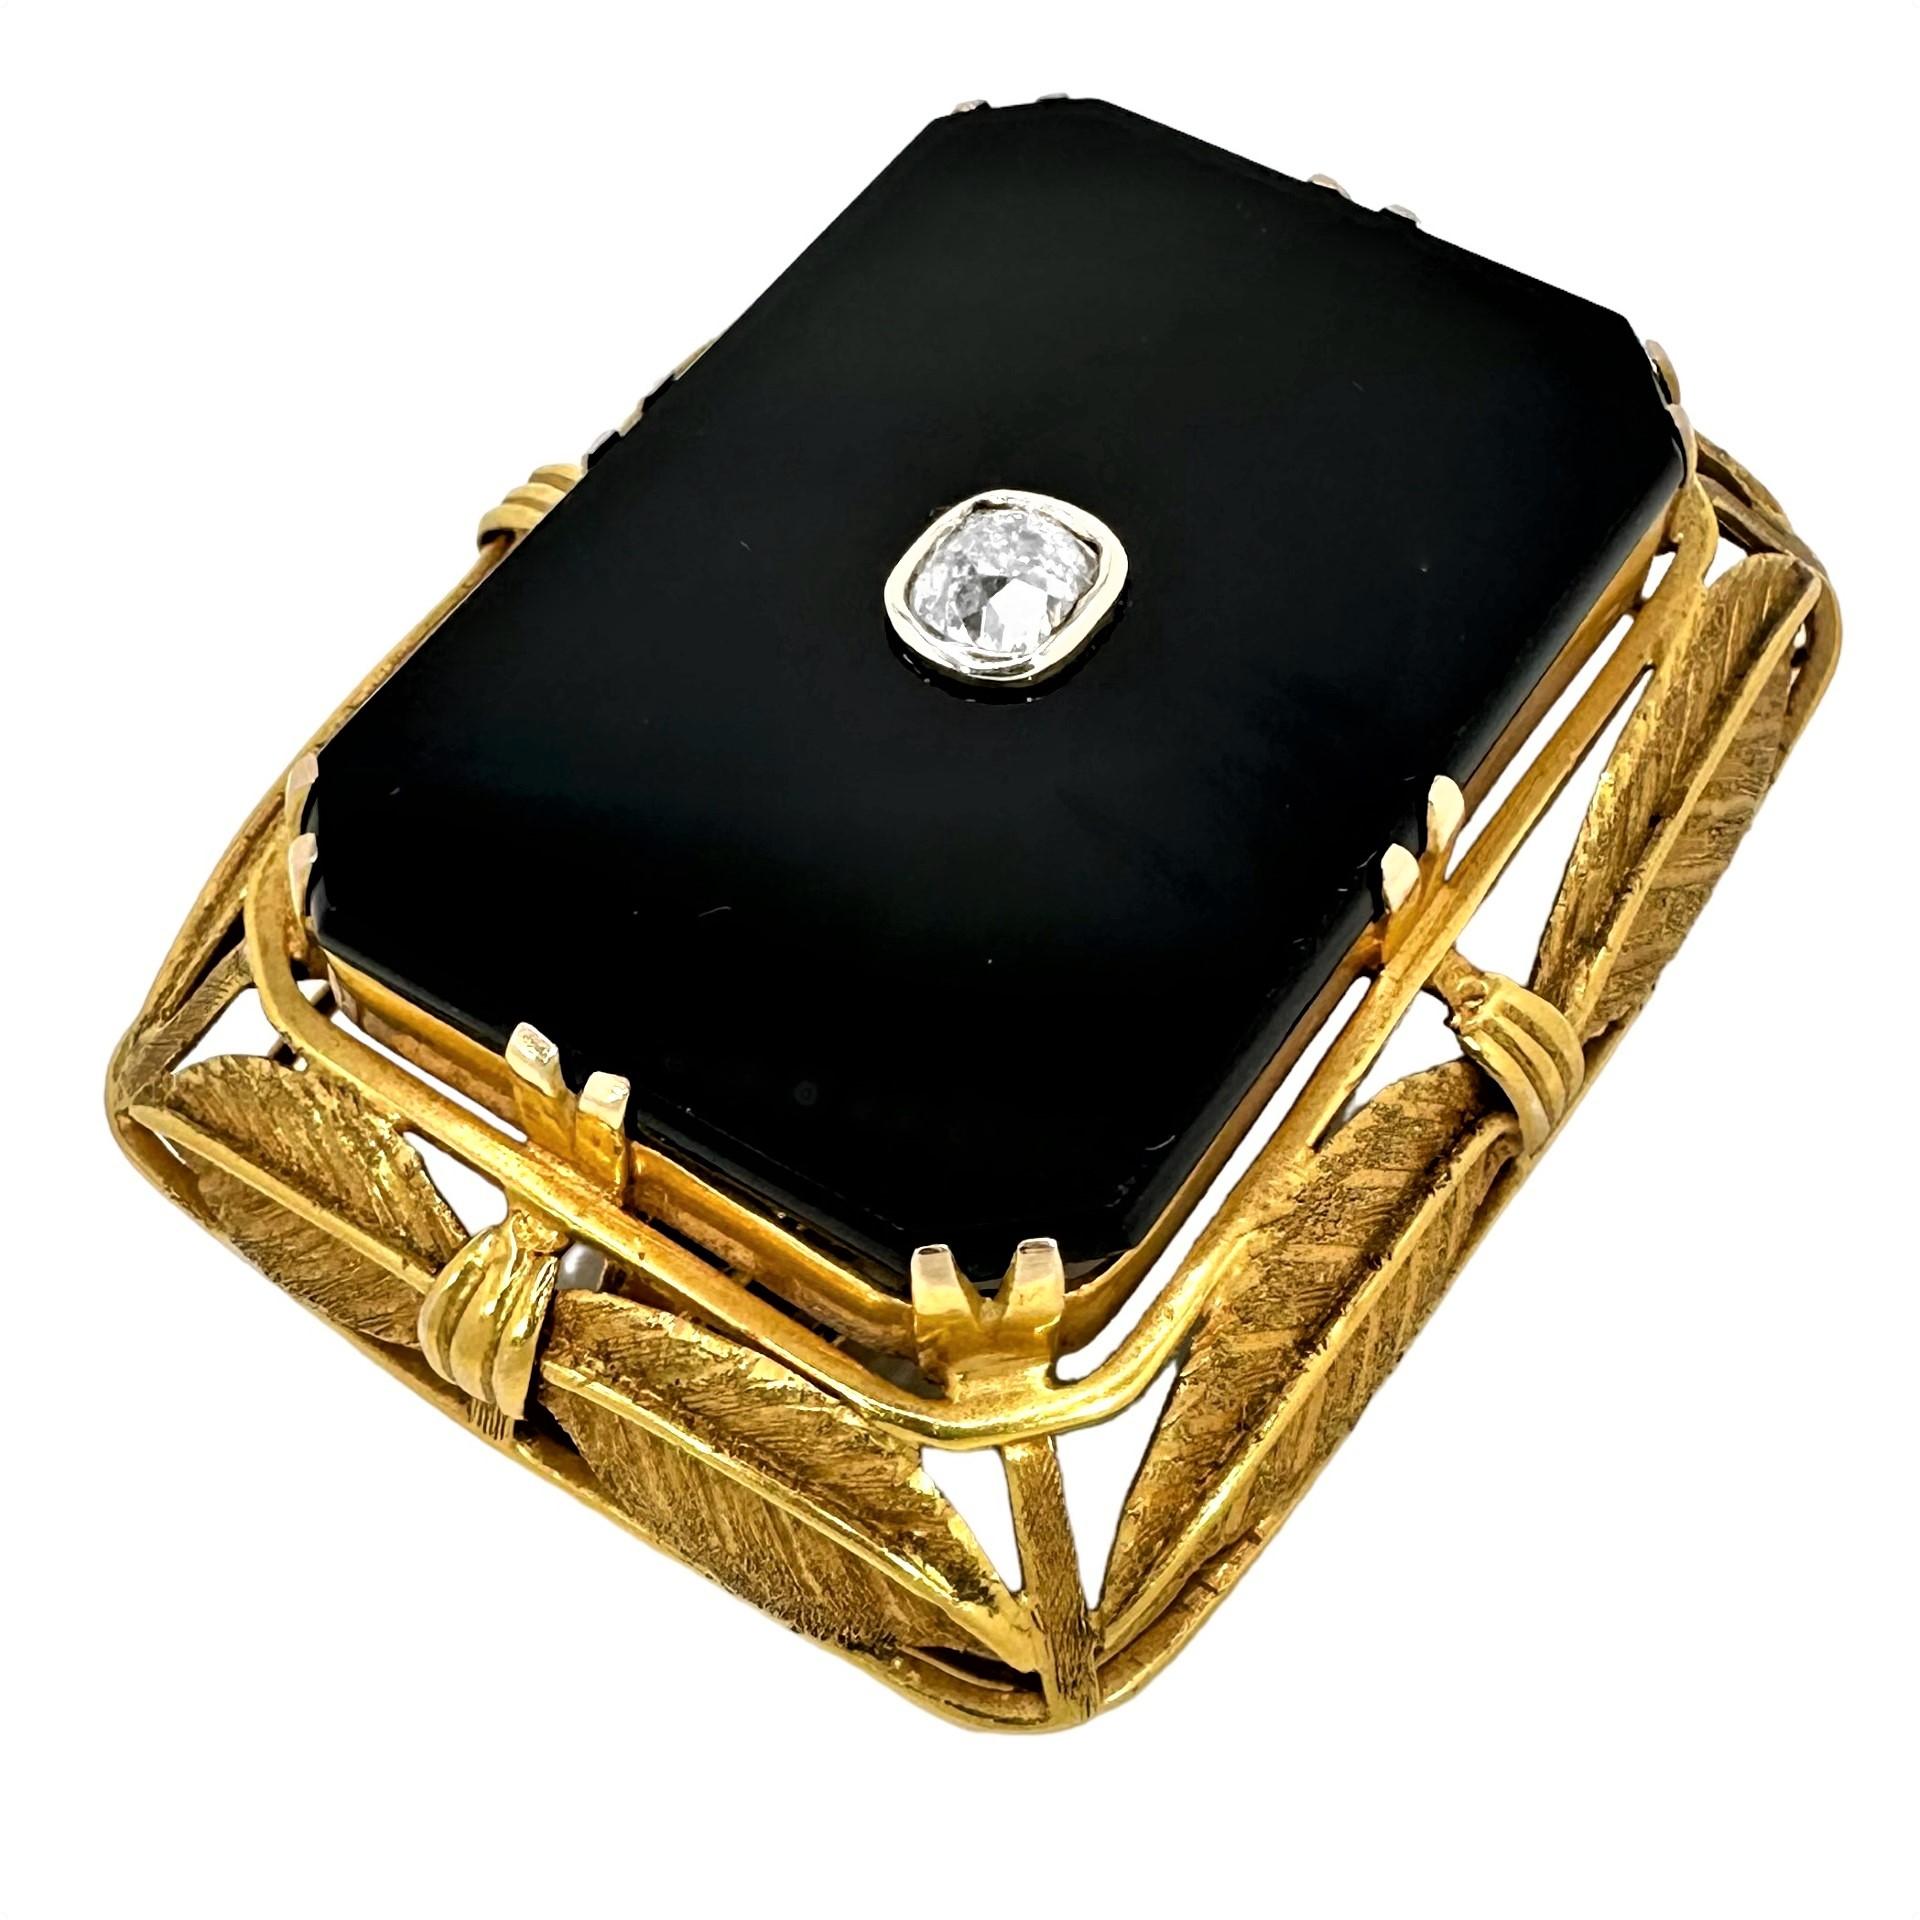 Arts & Crafts Period Large Scale 14k Gold Onyx and Diamond Pendant / Brooch In Good Condition For Sale In Palm Beach, FL